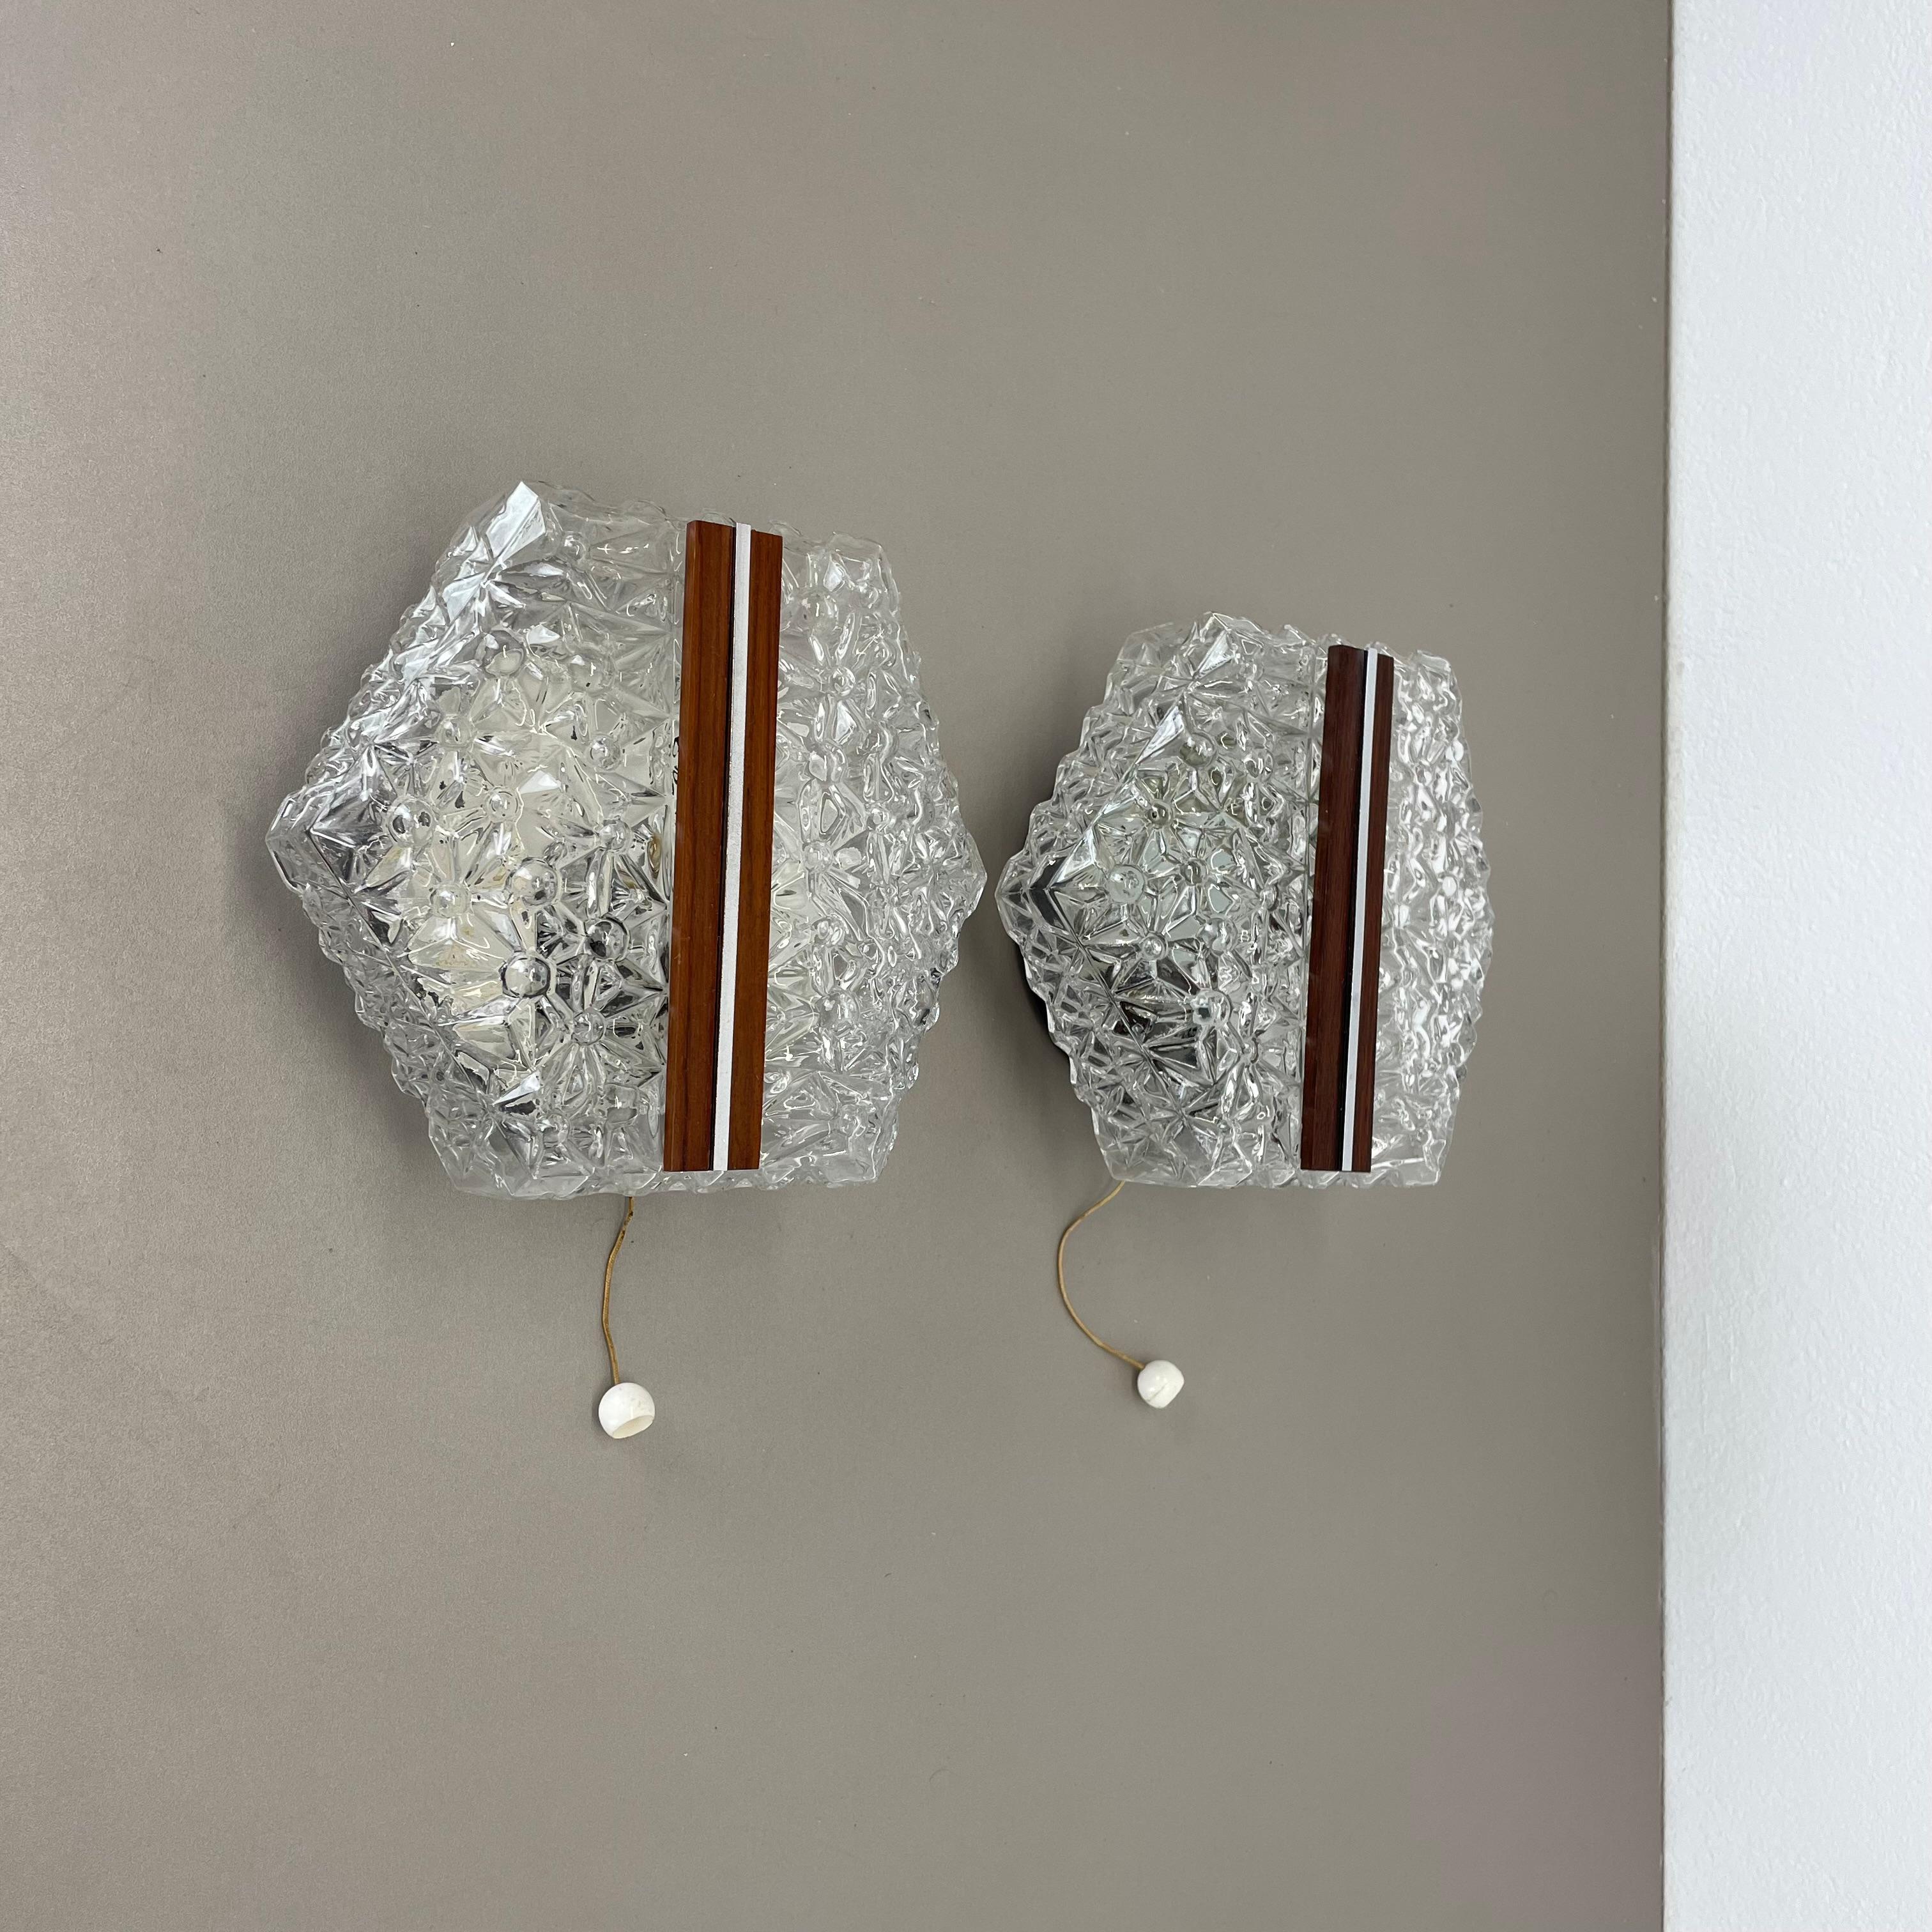 Article:

set of 2 Wall light sconce


Origin:

Germany



Age:

1970s



This original modernist wall light set was produced in Germany in the 1970s. It is made from glass and has a metal wall fixation. The lights have a fantastic abstract and